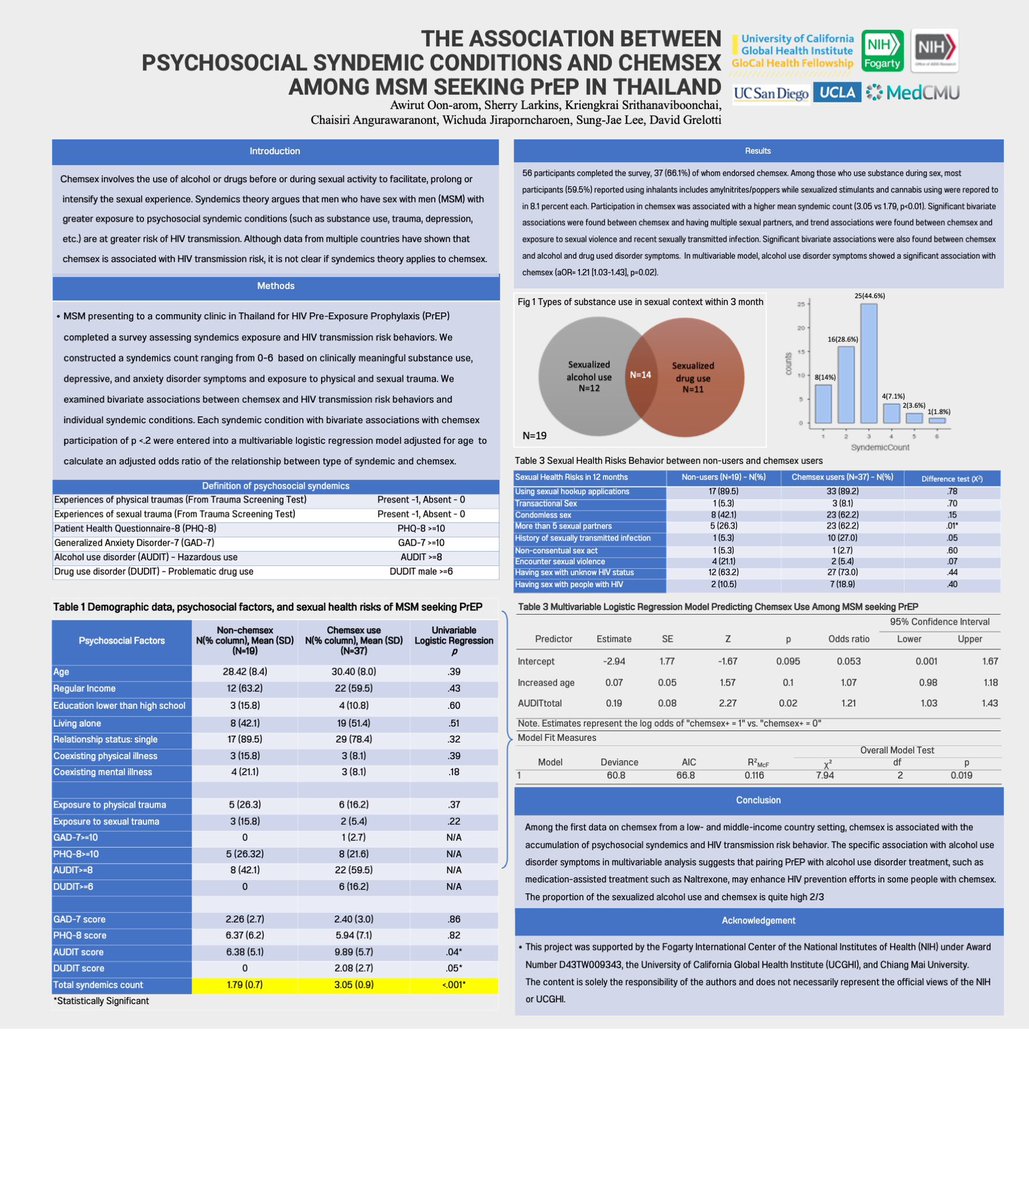 My pleasure to be part of the poster presentation at #CPDD2023 My presenting poster focused on the relationship between psychological syndemics counts and sexualized alcohol & chemsex use among MSM who seeking PrEP in Thailand.
#GloCal #globalhealthresearch 
#medCMU